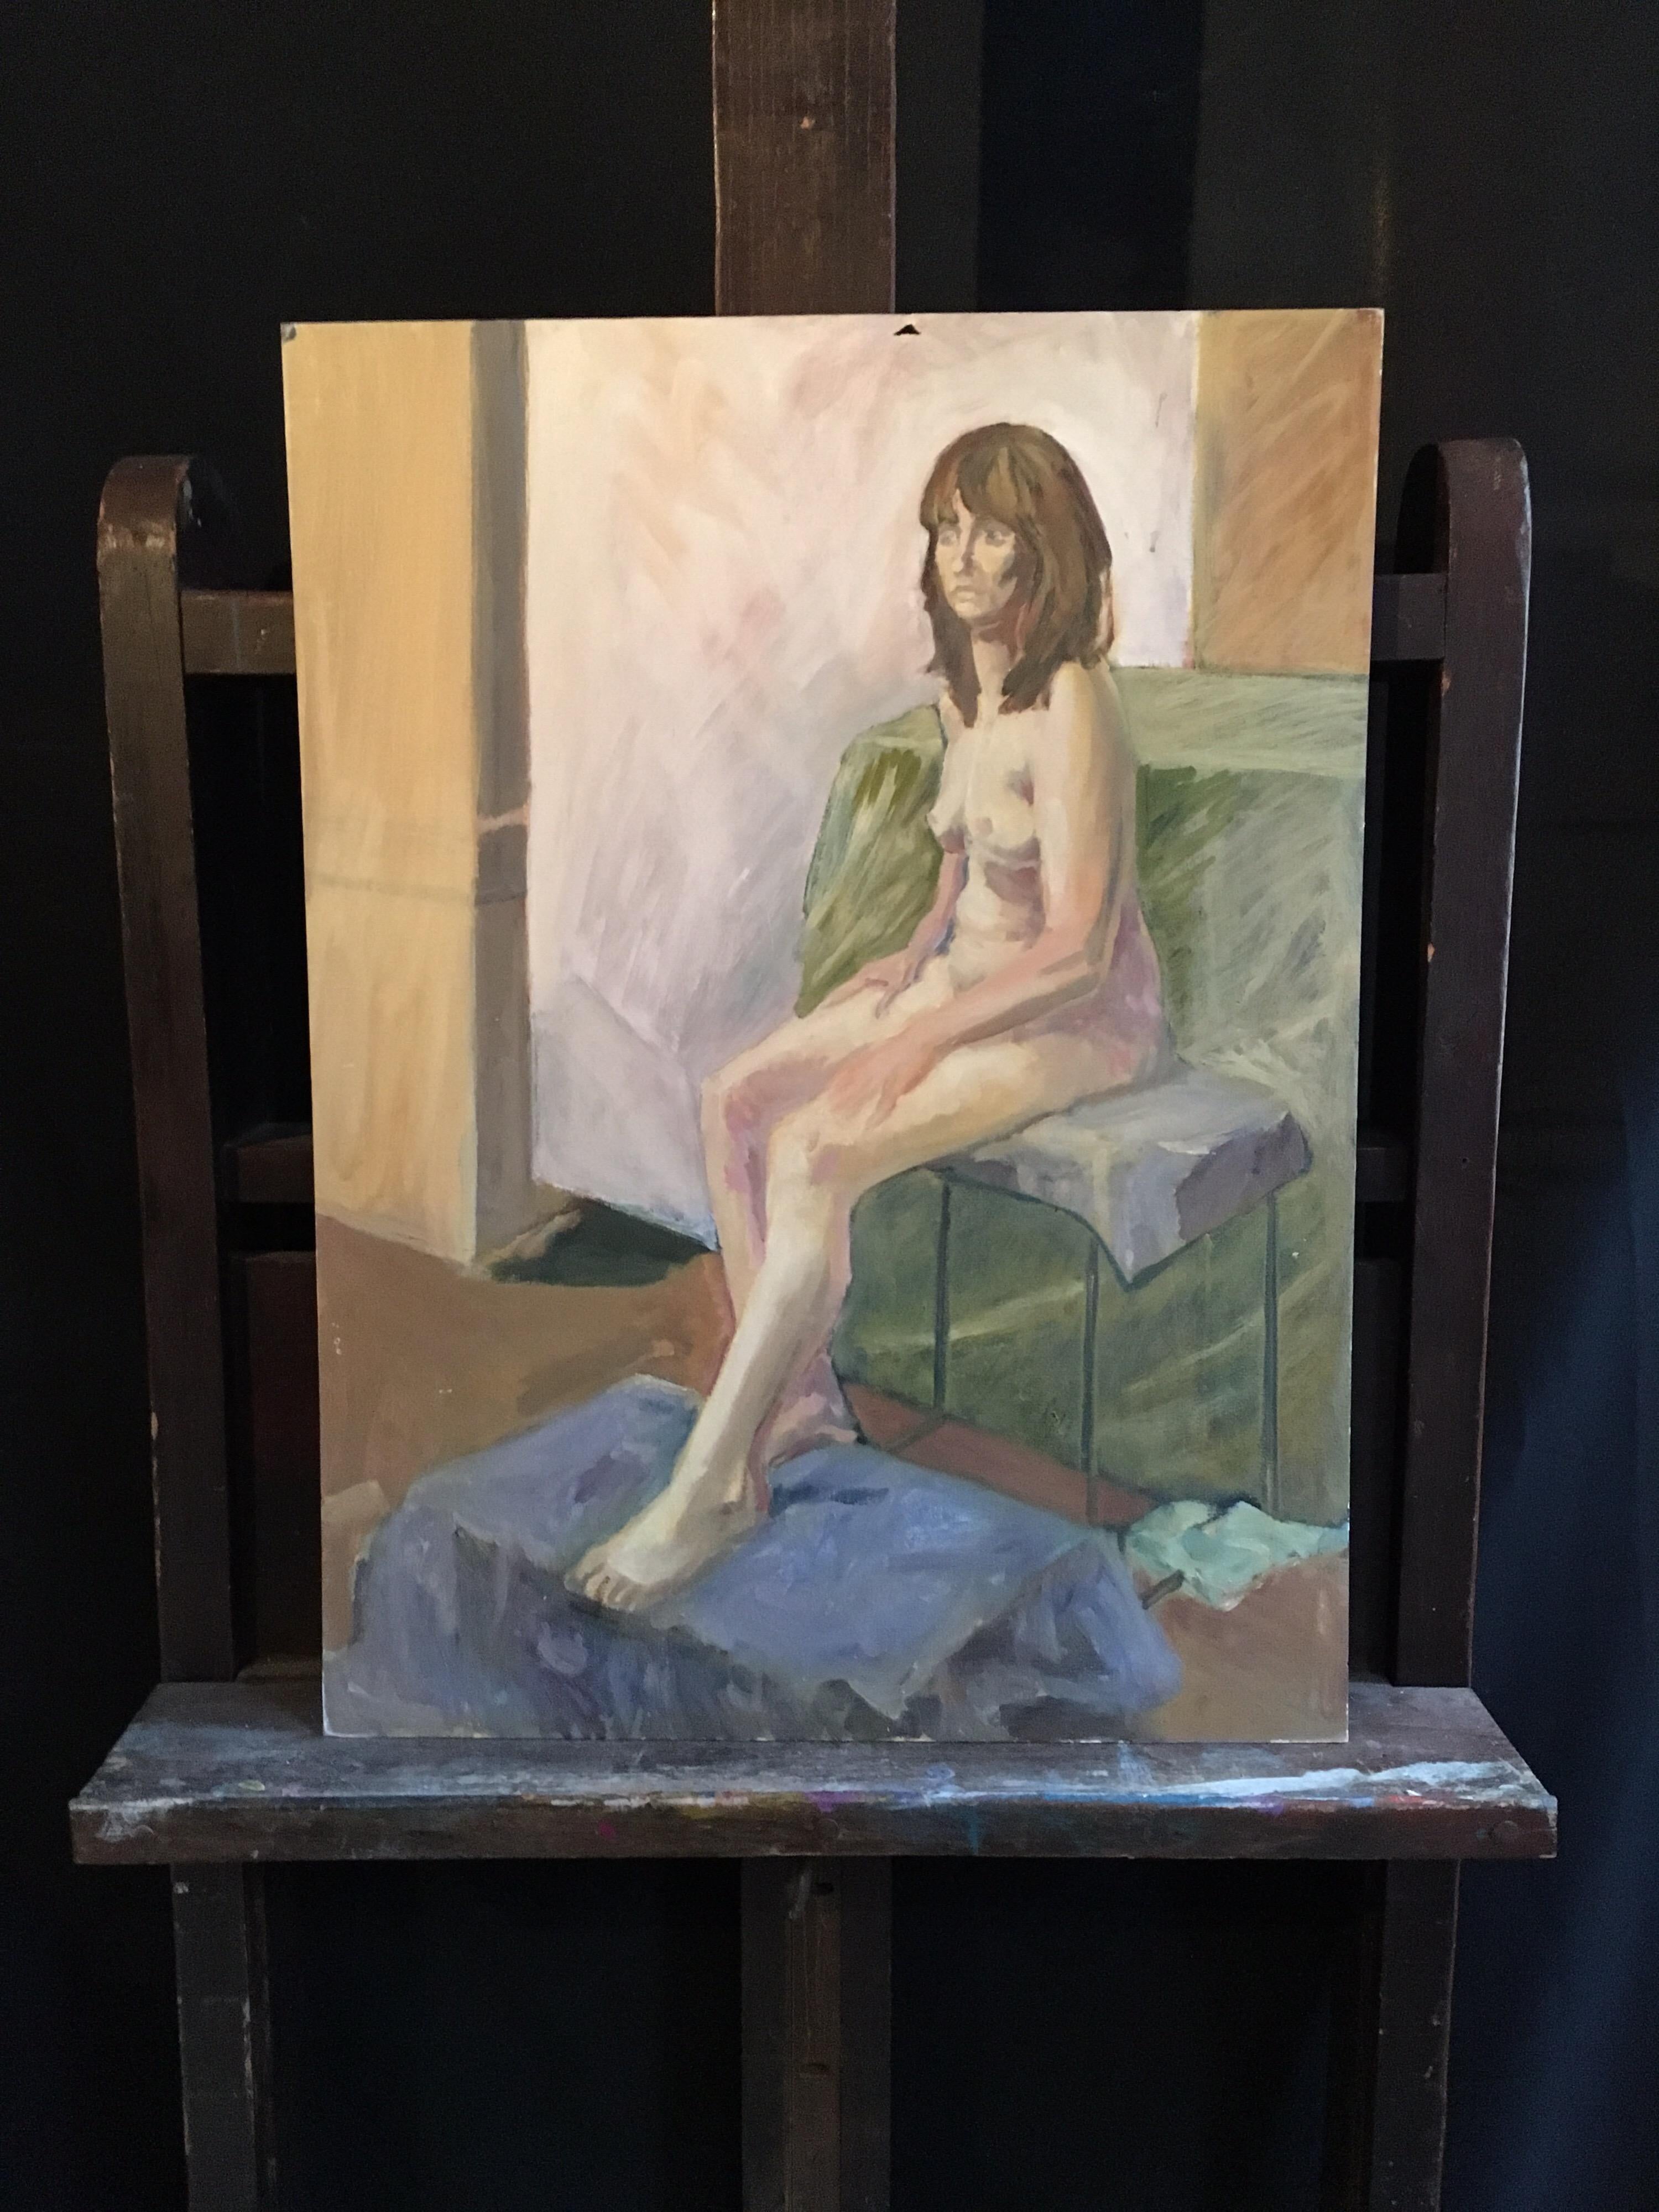 Taking a Moment, Impressionist Portrait, Original Oil Painting ,
By British artist, Derek Kershaw, 20th Century,
Signed by the artist verso,
Oil painting on board, unframed
Board size: 24 x 18 inches

Compelling portrayal of a woman deep in thought.